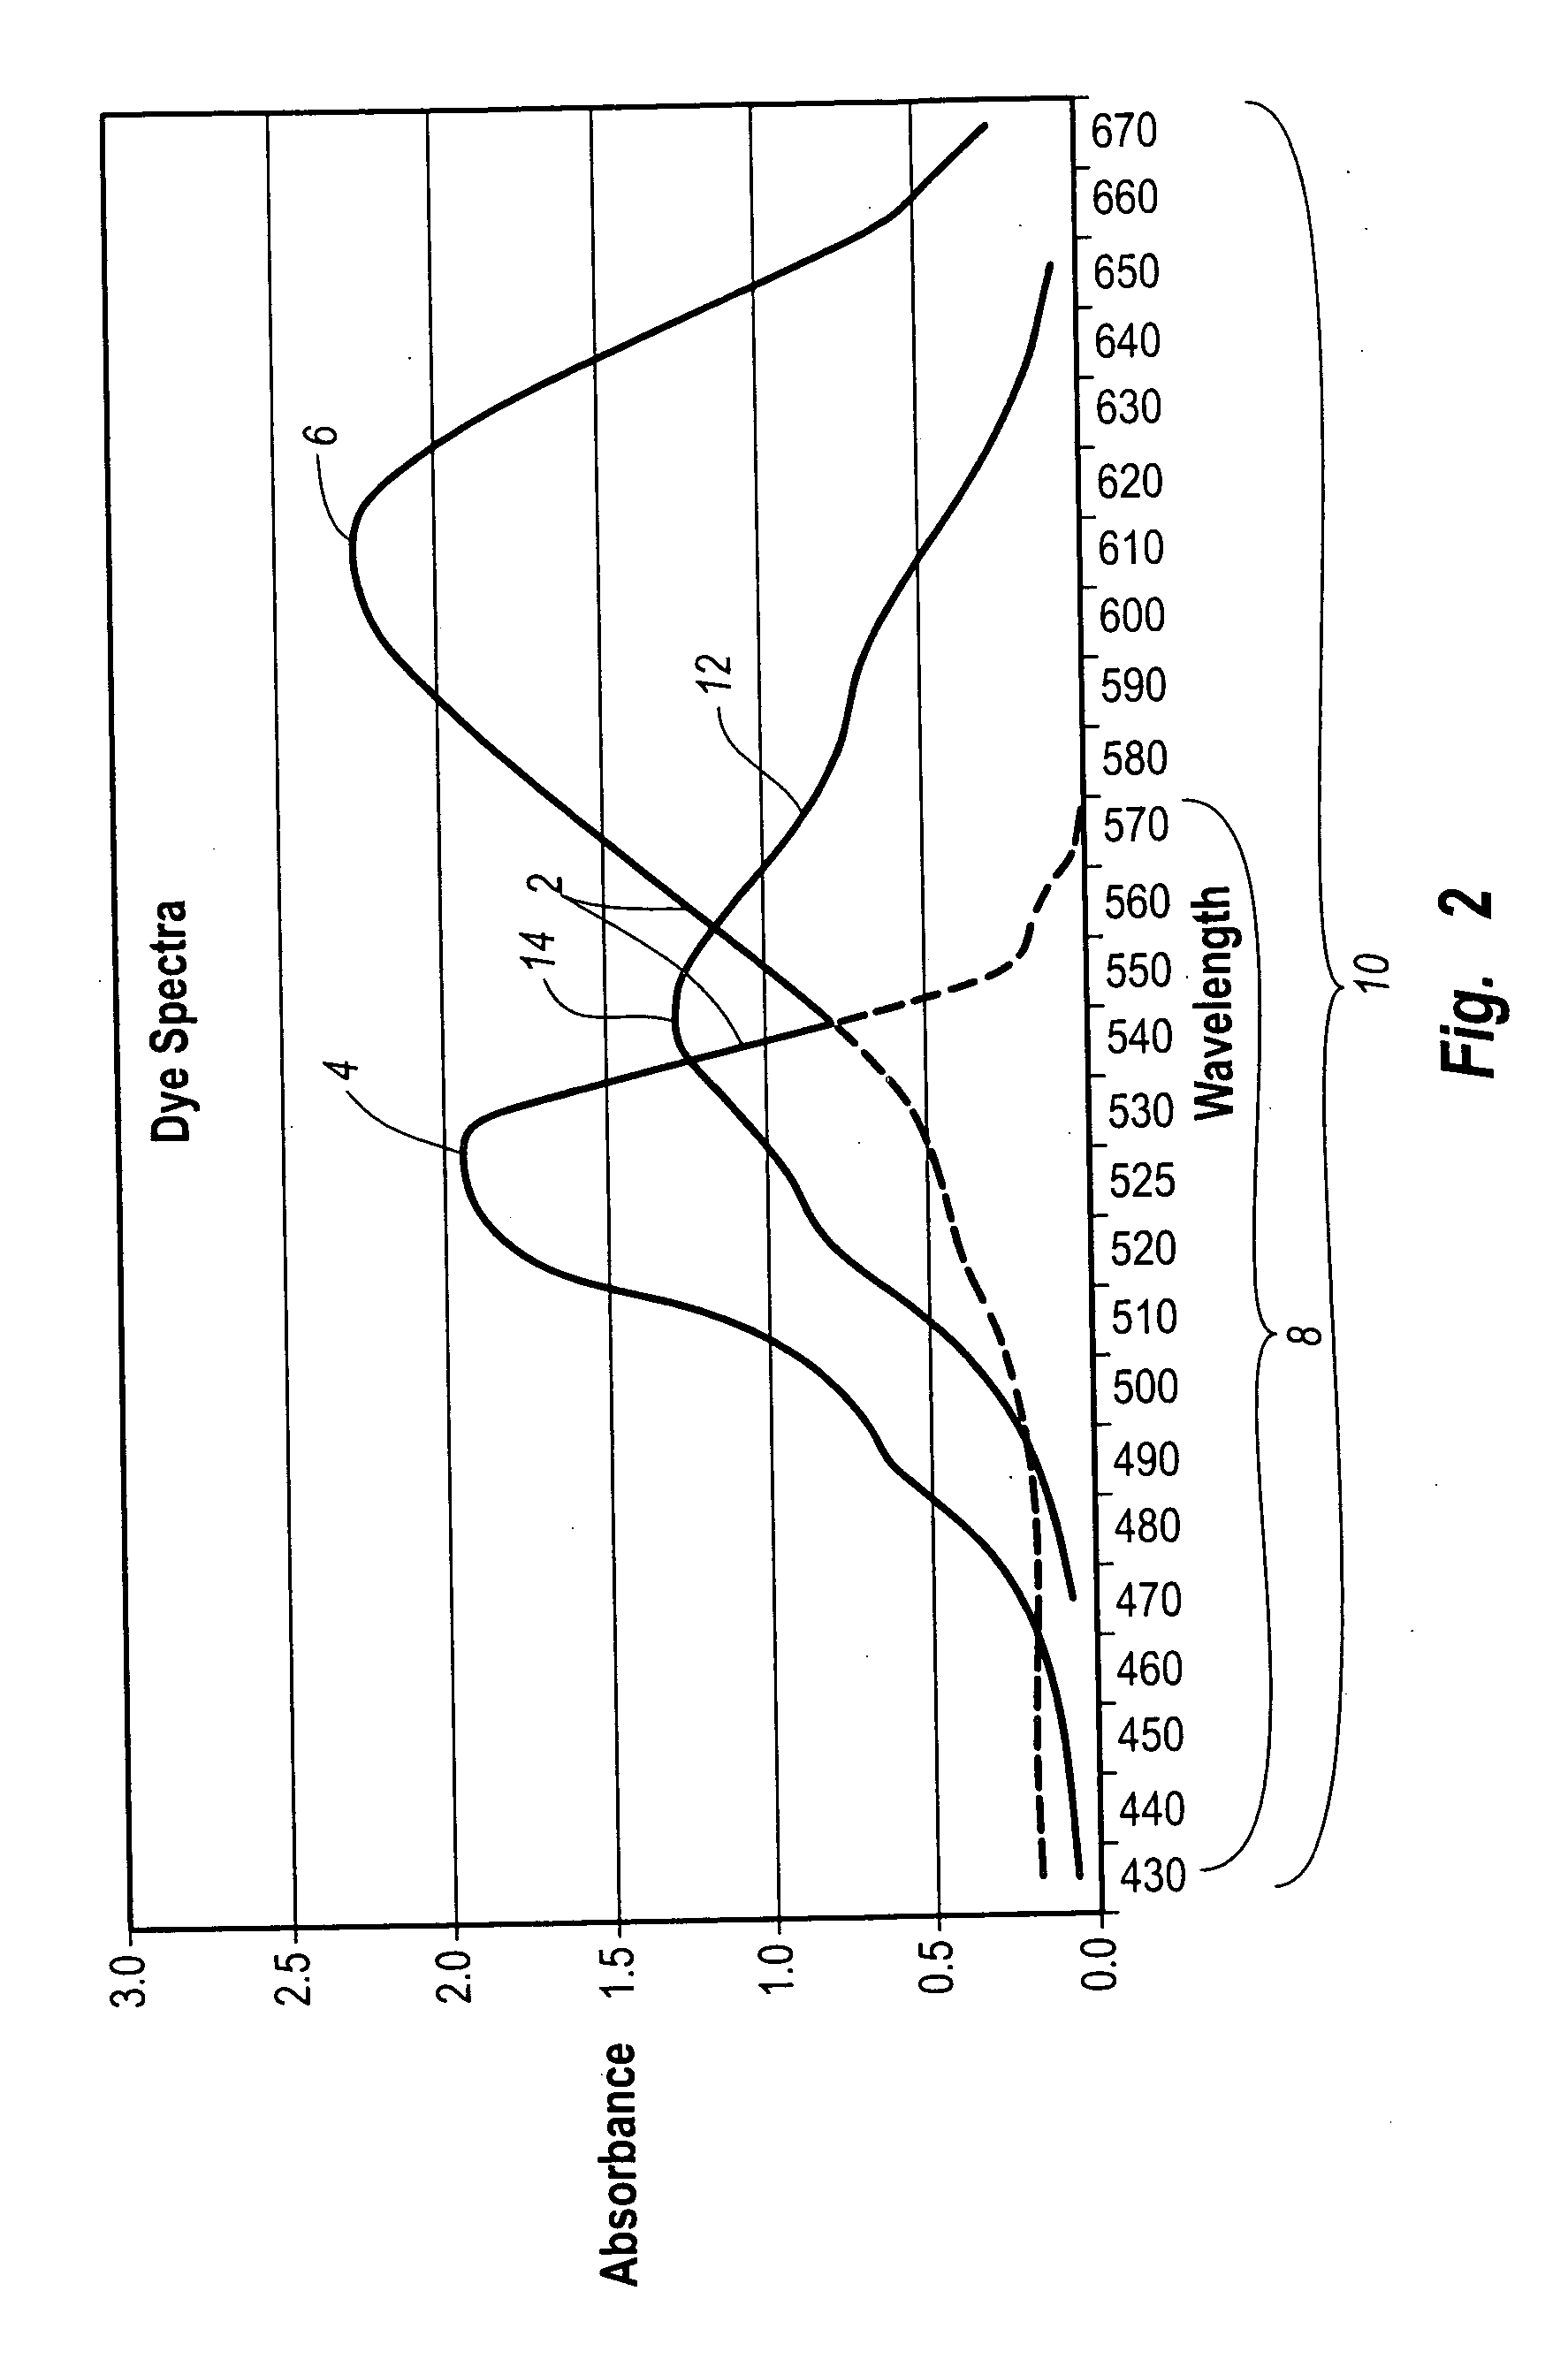 Tooth whitening compositions and methods for using the same